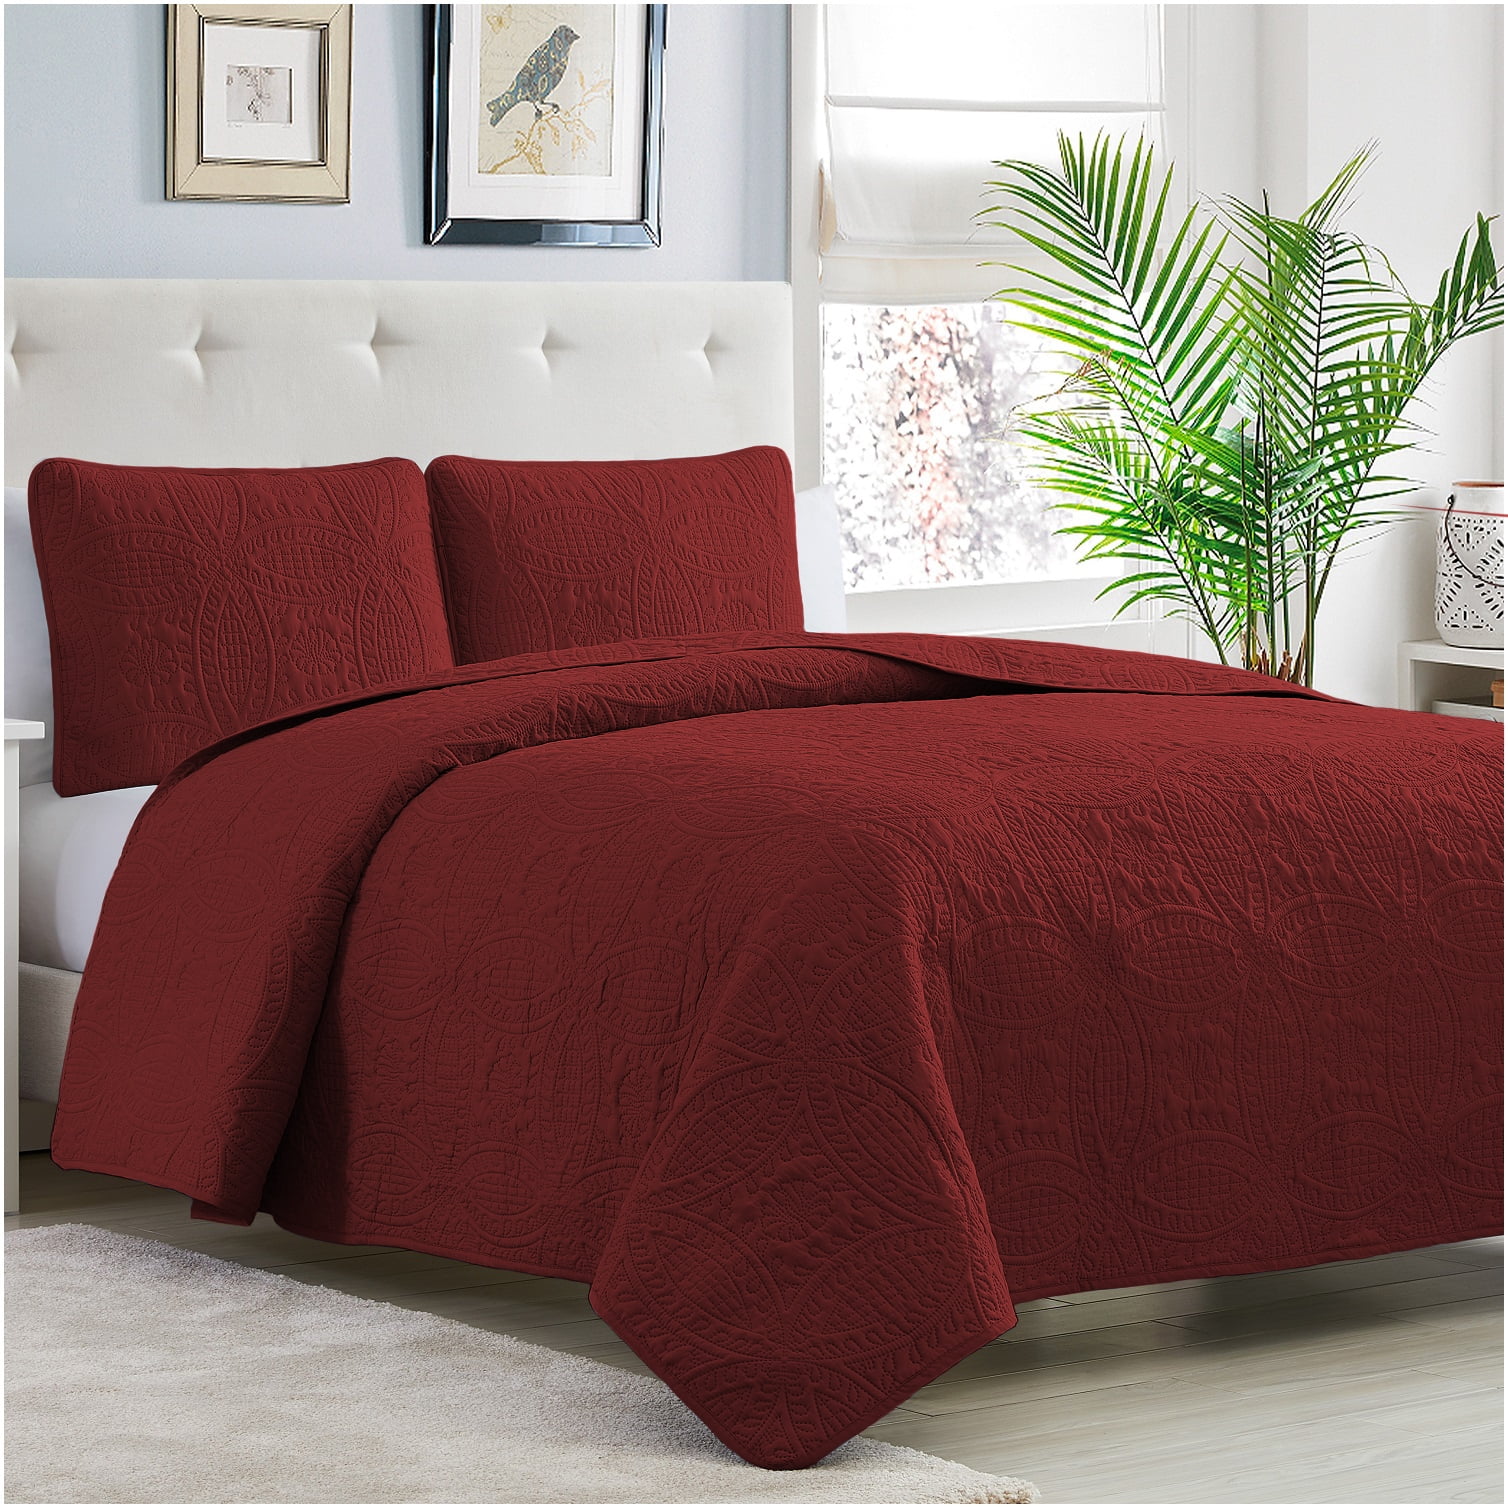  Home Collection 3pc Full/Queen Over Size Elegant Embossed  Bedspread Set Light Weight Solid Burgundy New : Home & Kitchen